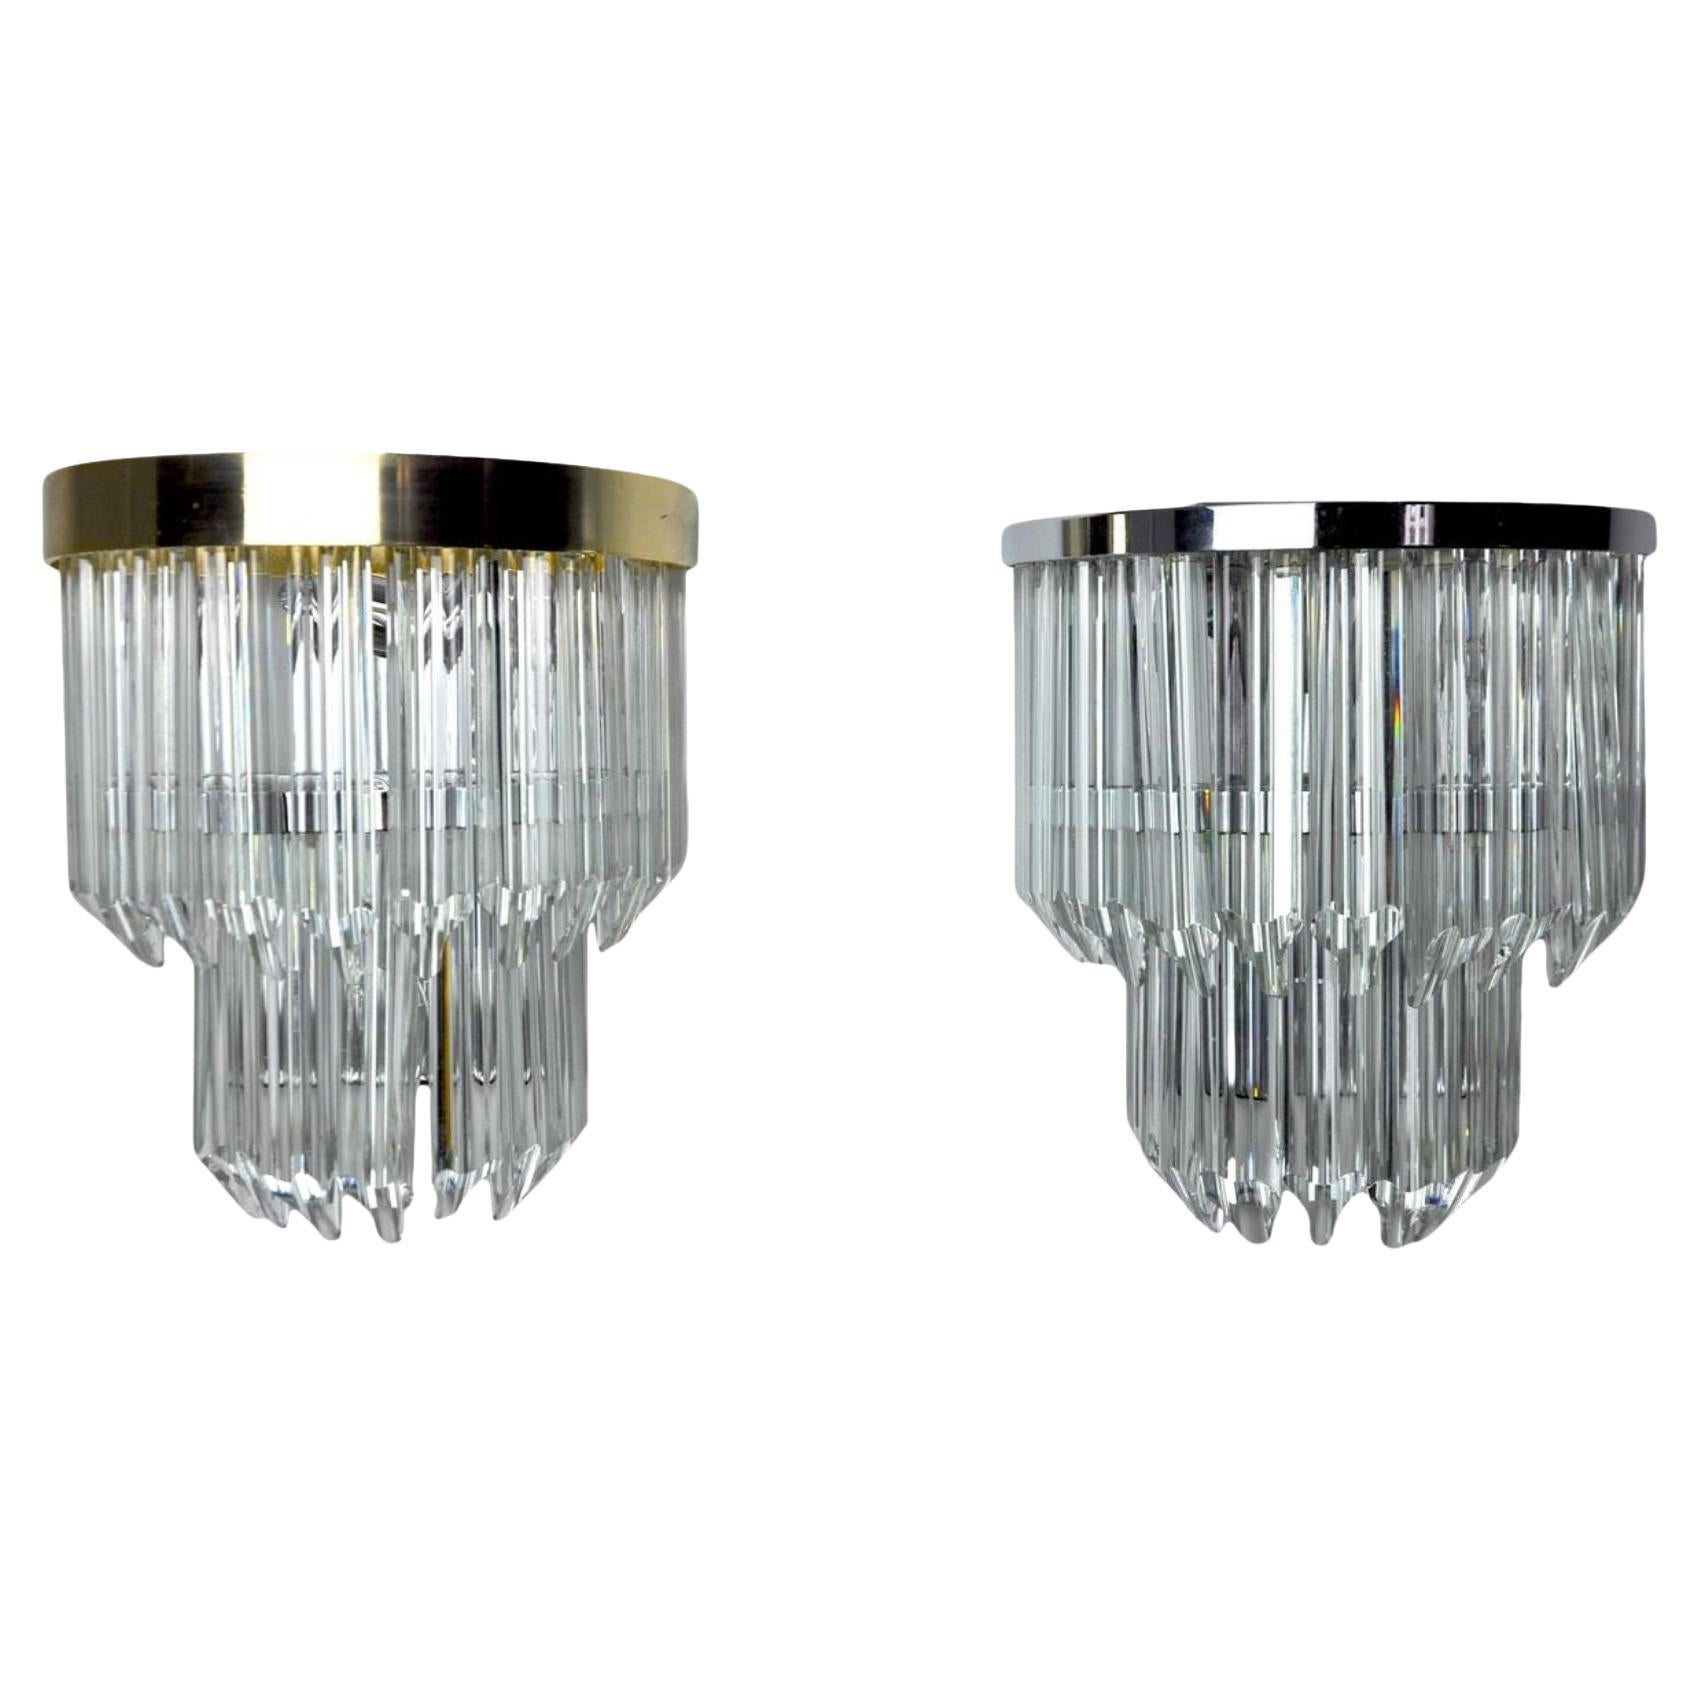 1970s Paolo Venini Chrome and Glass Sconces, Italy, a Pair